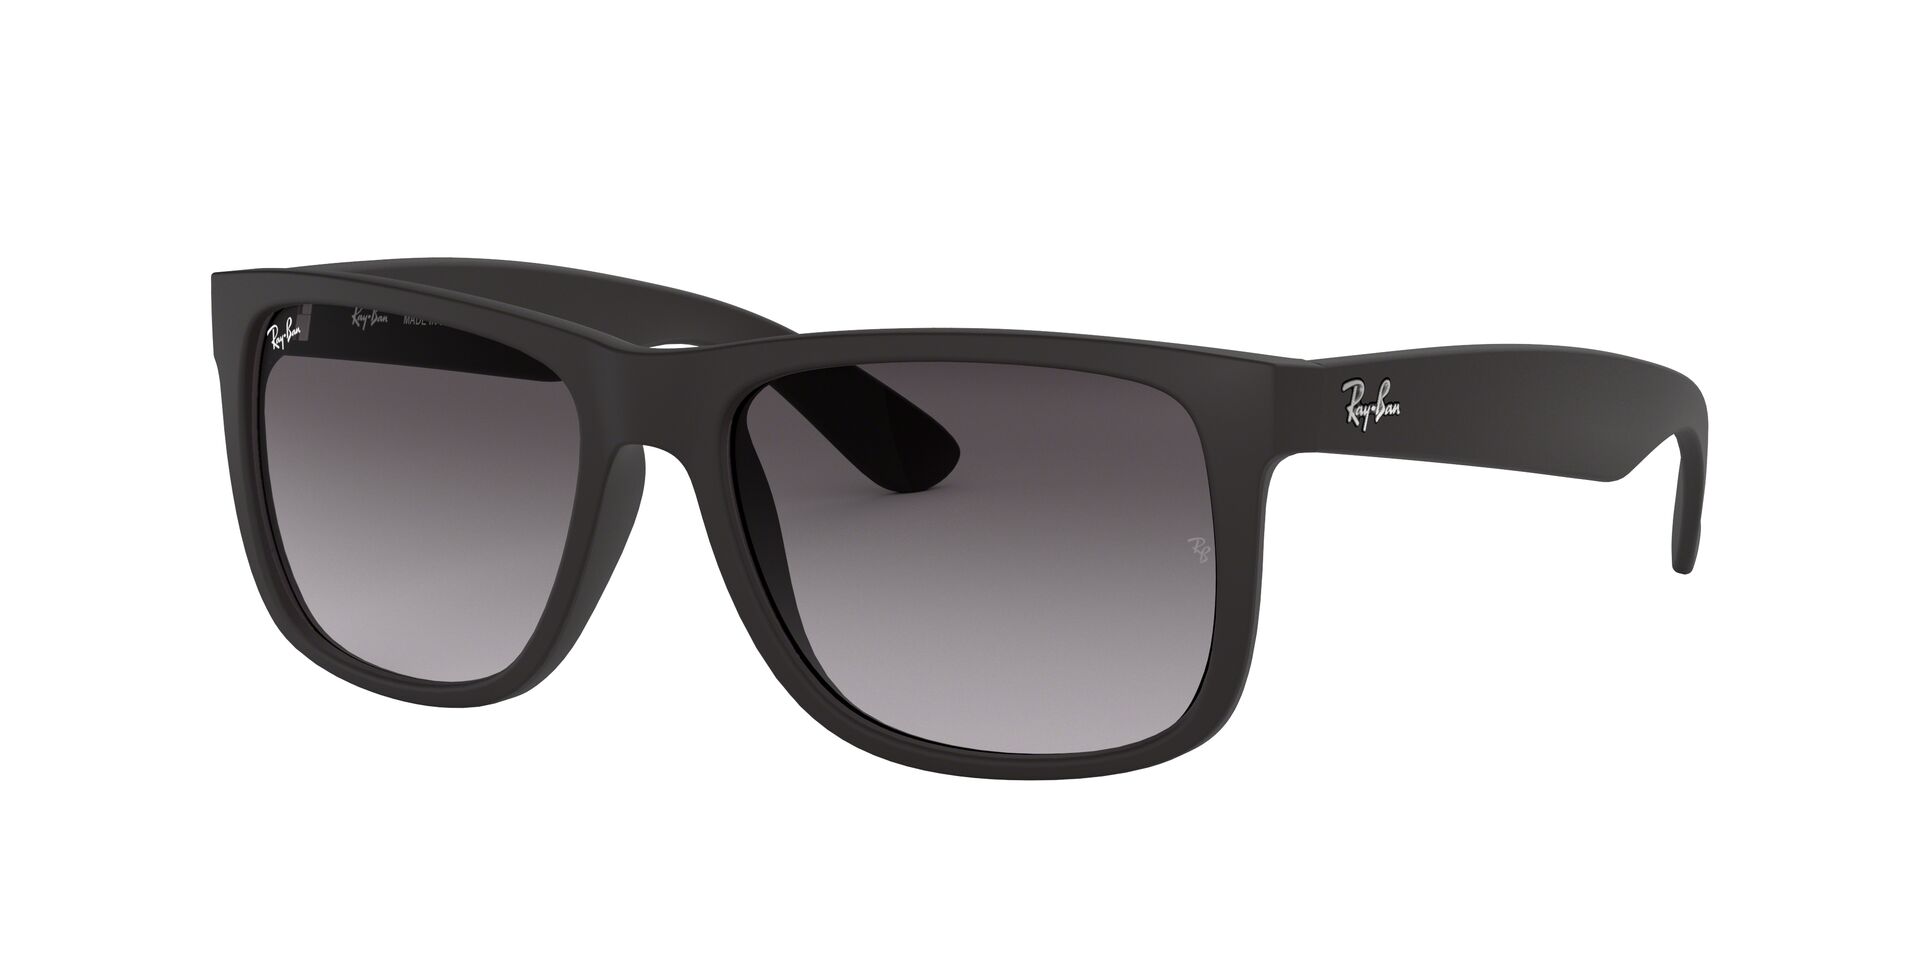 Ray-ban Justin Classic RB4165 601-8G 55 